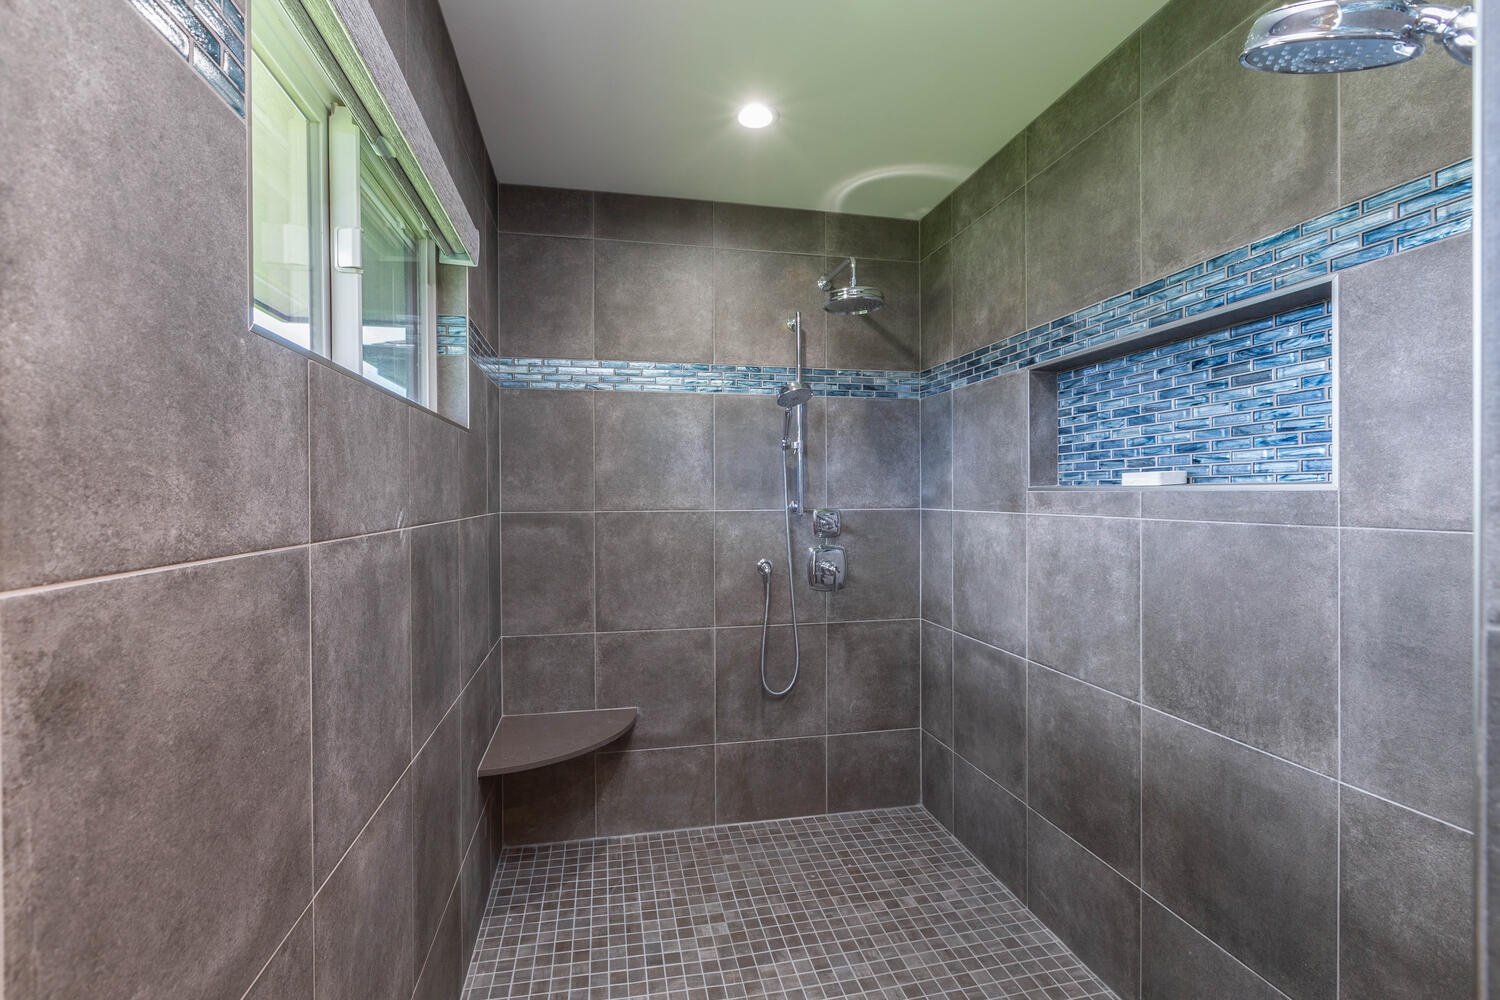 Princeville Vacation Rentals, Aloha Villa - Modern design shower where to relax after a day at the beach